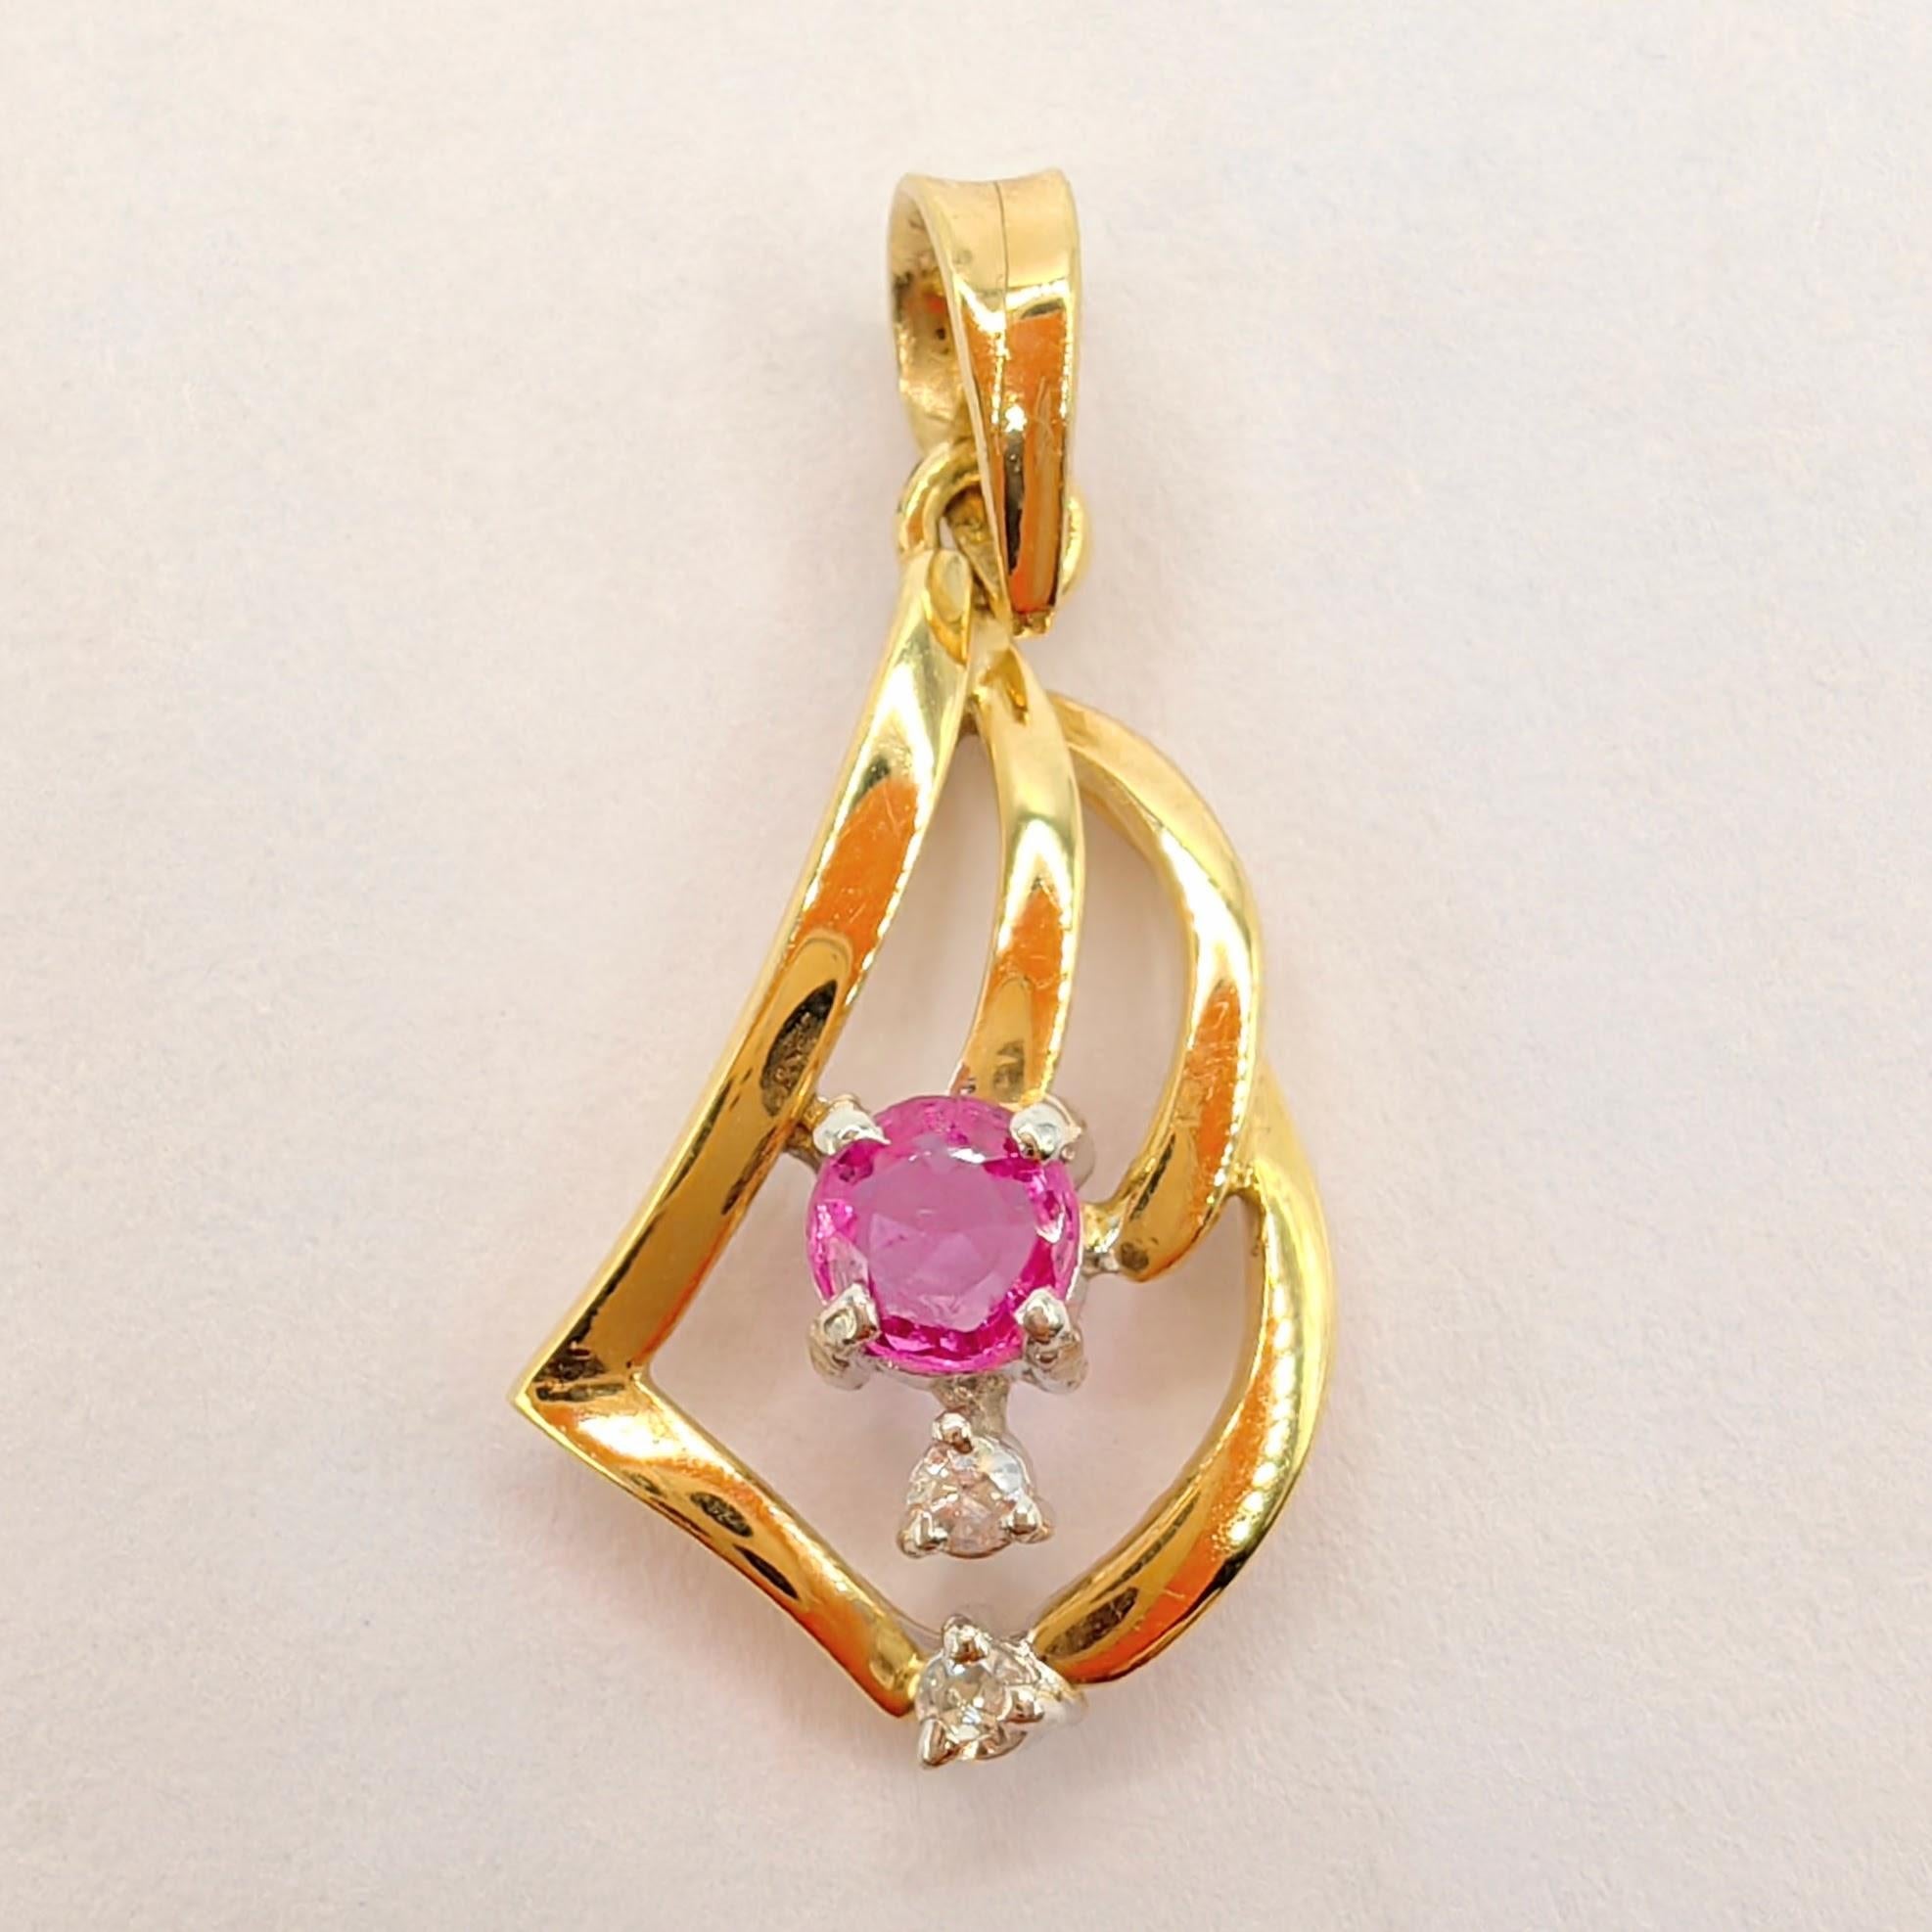 Introducing our Vintage Natural Pink Sapphire Diamond Necklace Pendant in 14K Yellow Gold, a stunning piece that combines the allure of precious gemstones with the timeless elegance of vintage design.

At the heart of this pendant lies a captivating